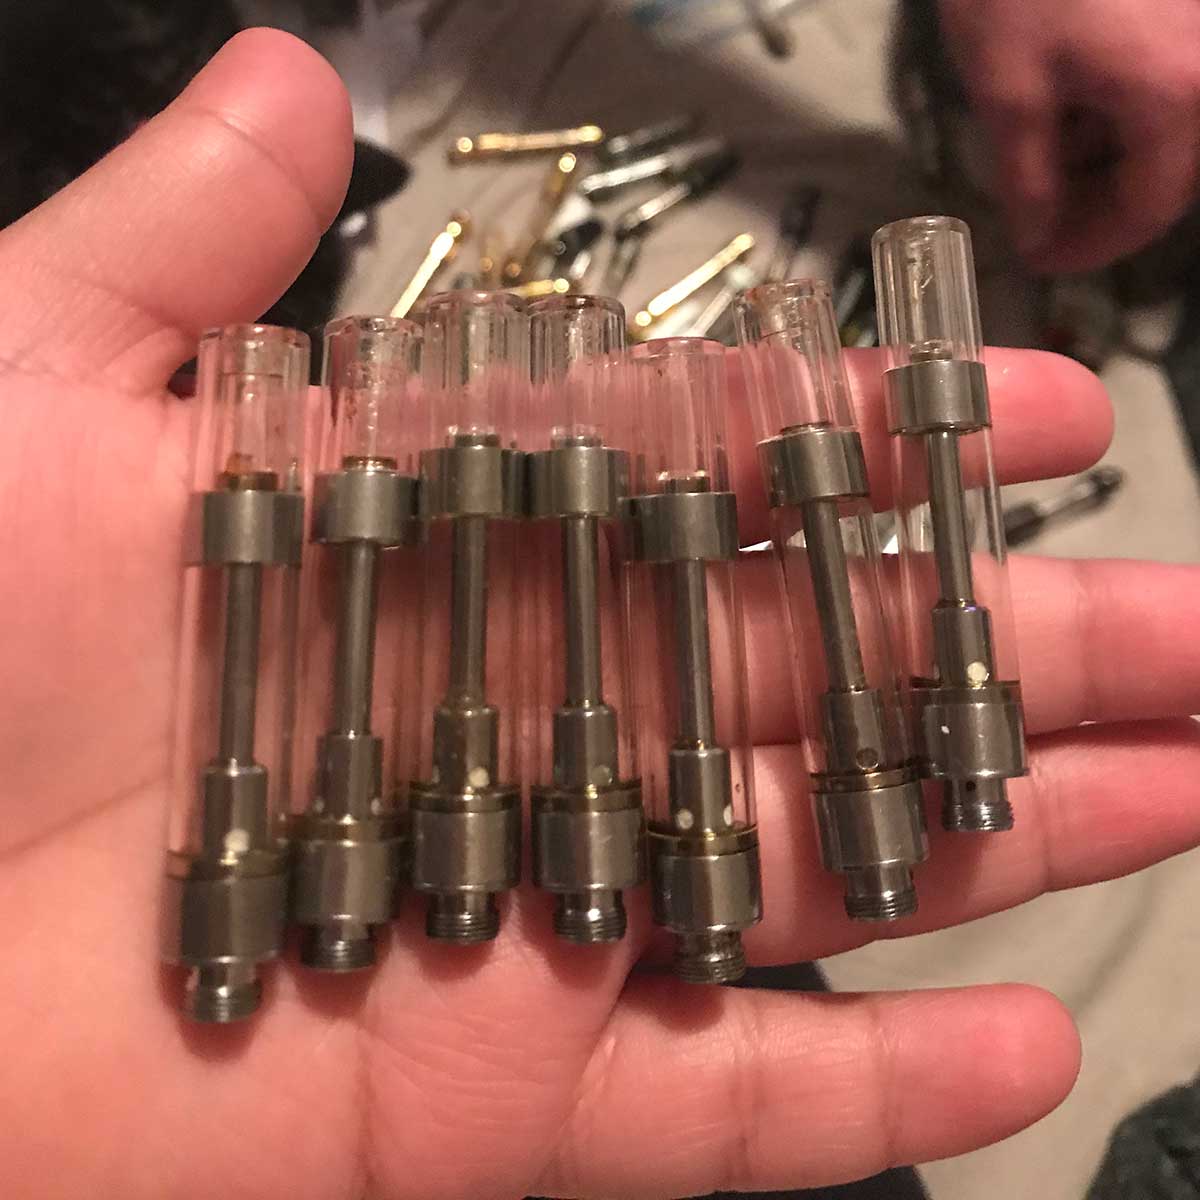 Utah VAPI victim Kyle DeGraw got progressively more ill this year after using Dank Vapes and counterfeit ROVE cartridges obtained from illicit markets. Leafly tests found significant amounts of vitamin E oil, lead, and very high levels of pesticides in the residual oil (Courtesy Kyle DeGraw)